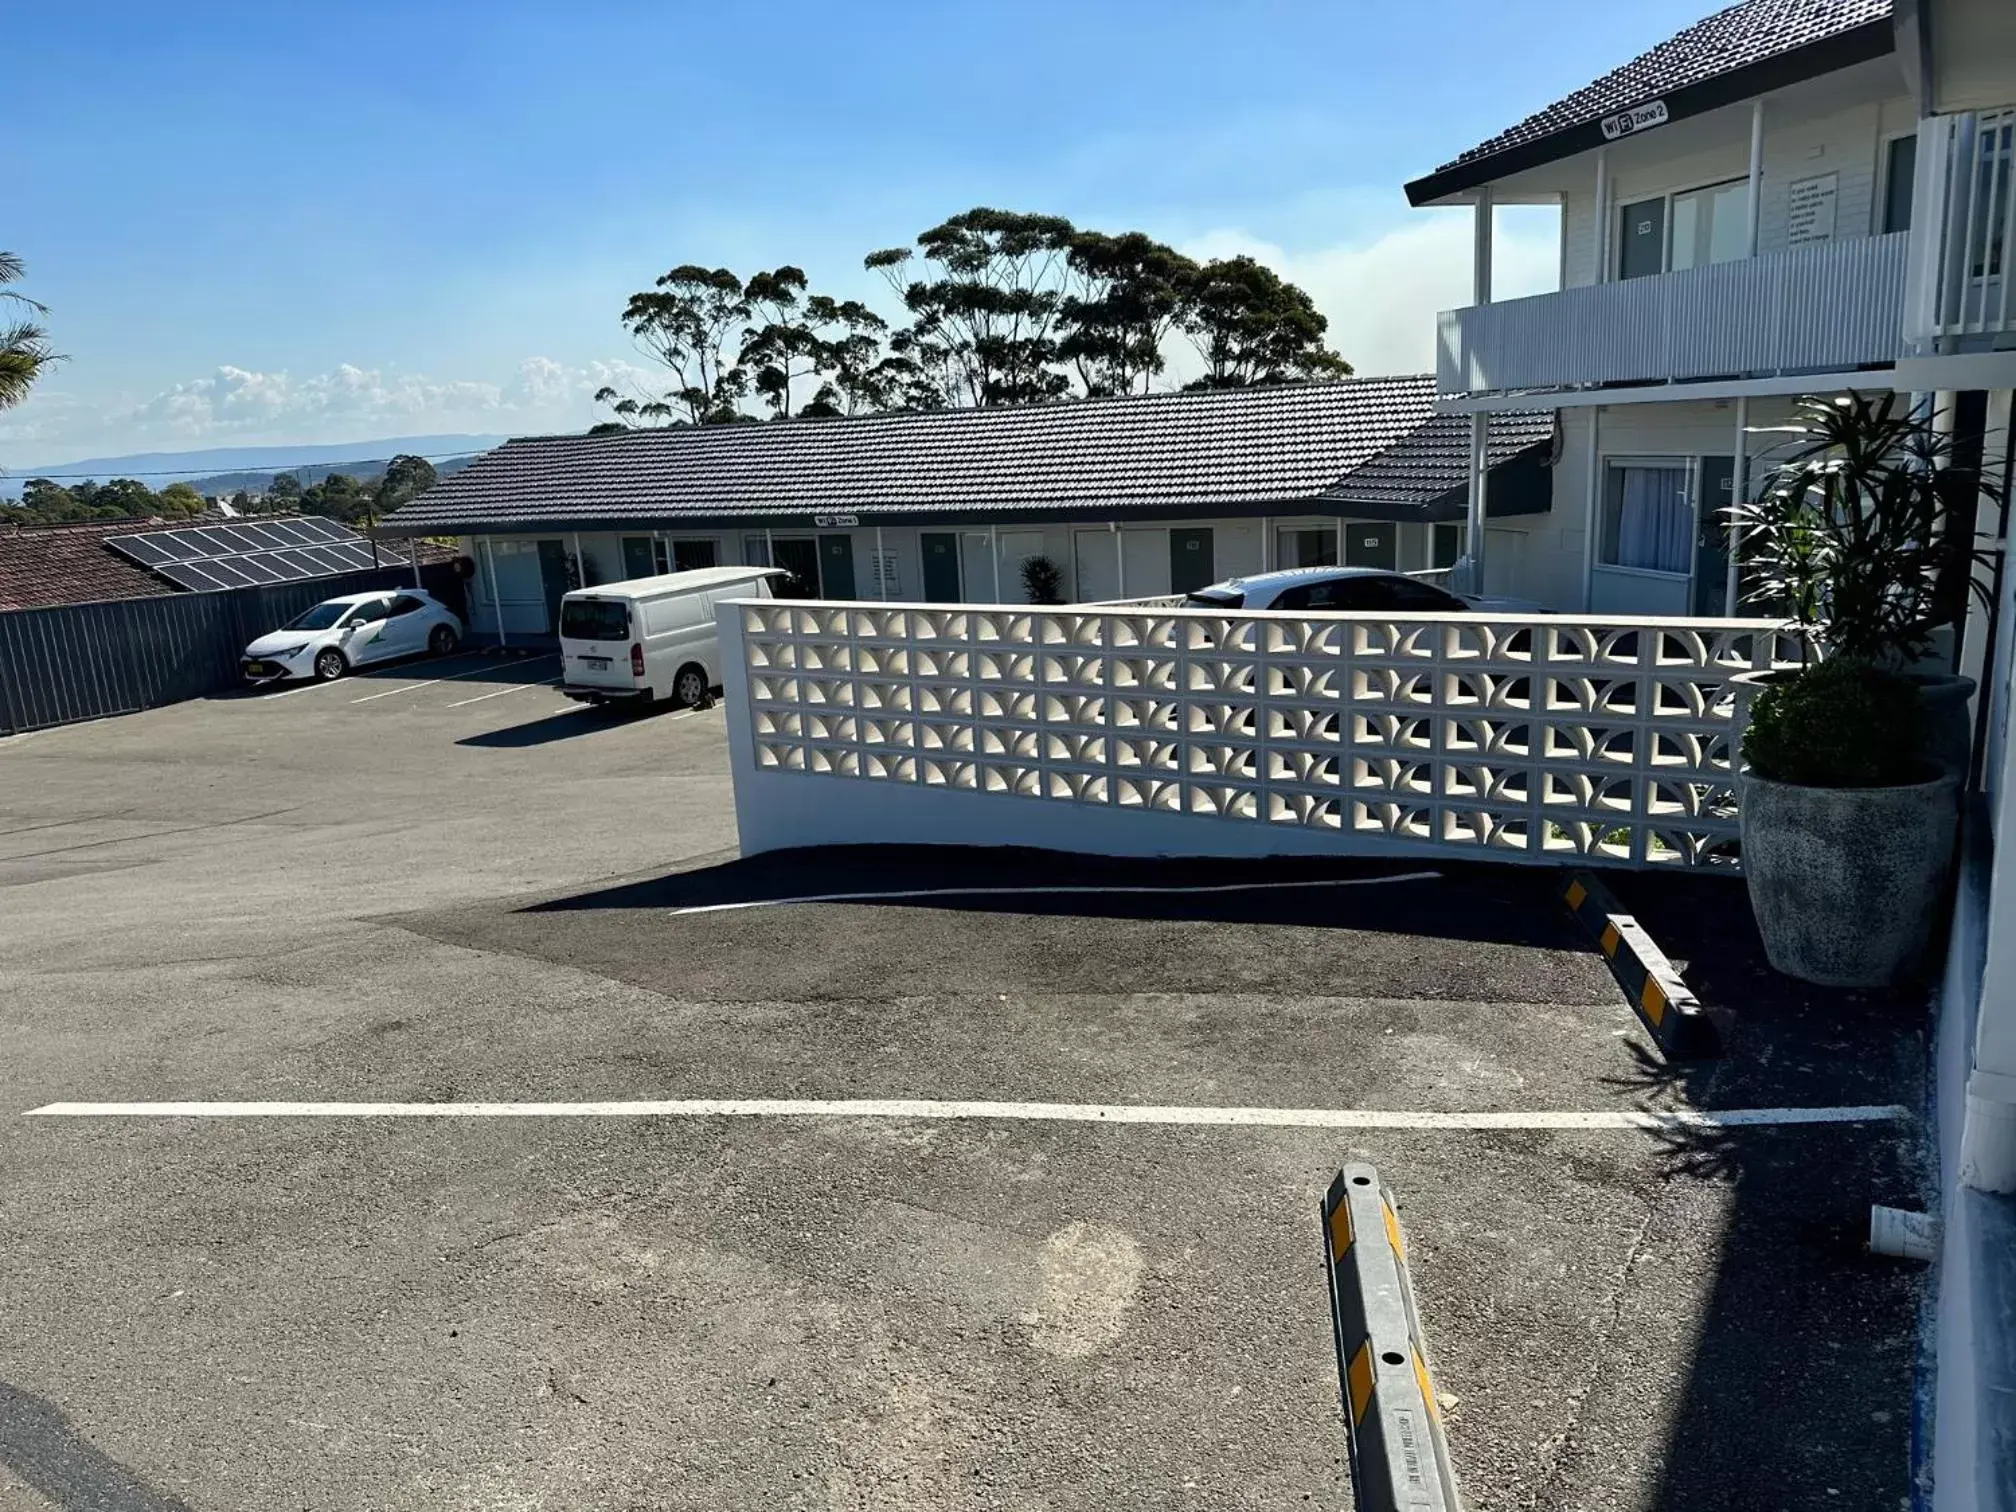 Property building in Surf Beach Motel Newcastle